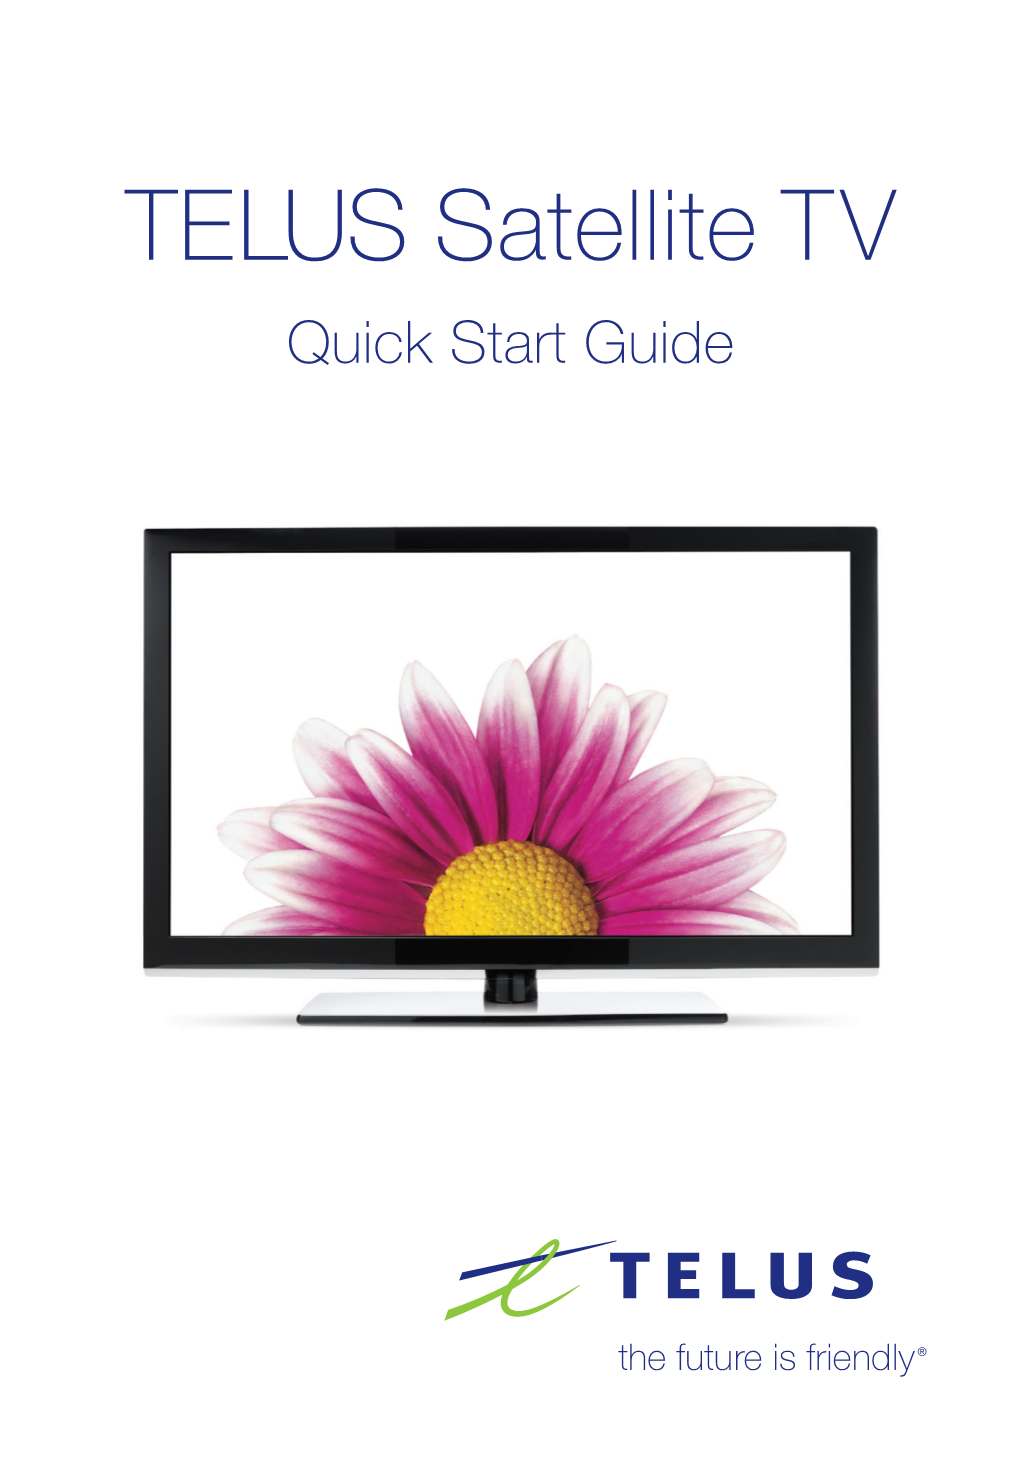 TELUS Satellite TV Quick Start Guide Welcome Thank You for Choosing TELUS and Welcome to TELUS Satellite TVTM